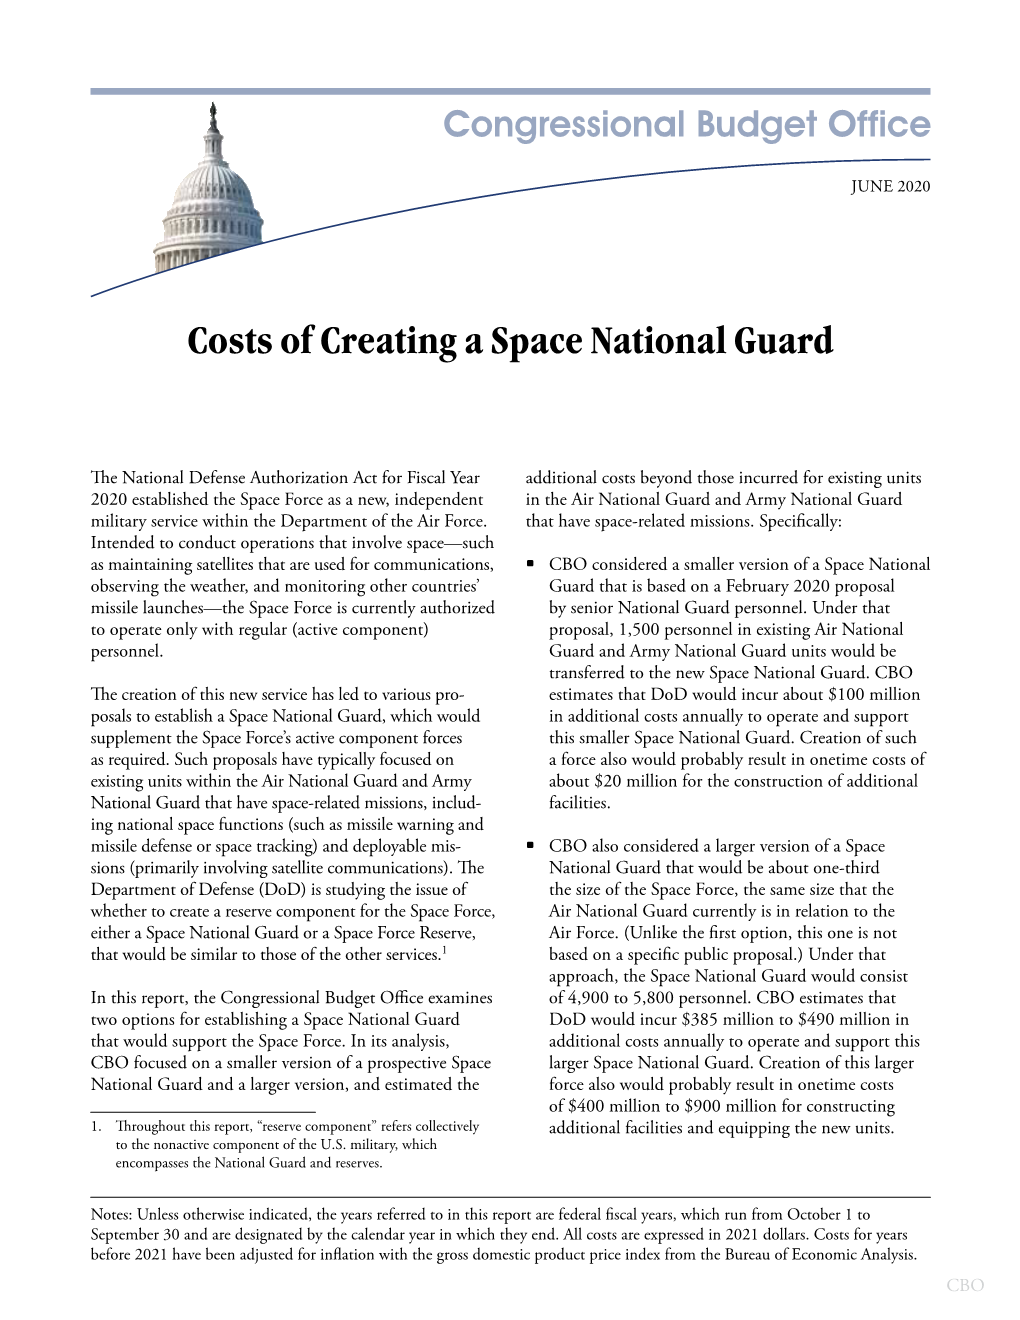 Costs of Creating a Space National Guard